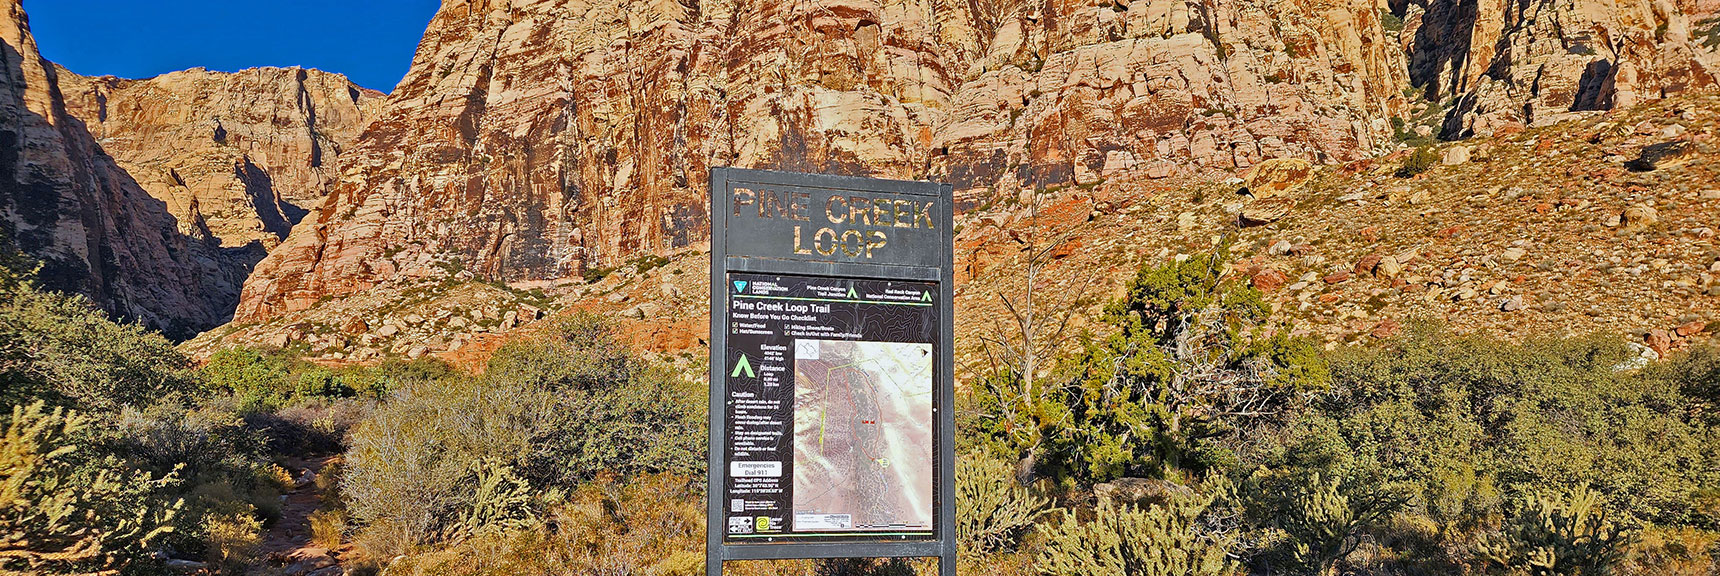 Begin by Taking Pine Creek Loop Trail Counterclockwise. | Rock Climber Observations | Pine Creek Canyon | Rainbow Mountain Wilderness, Nevada